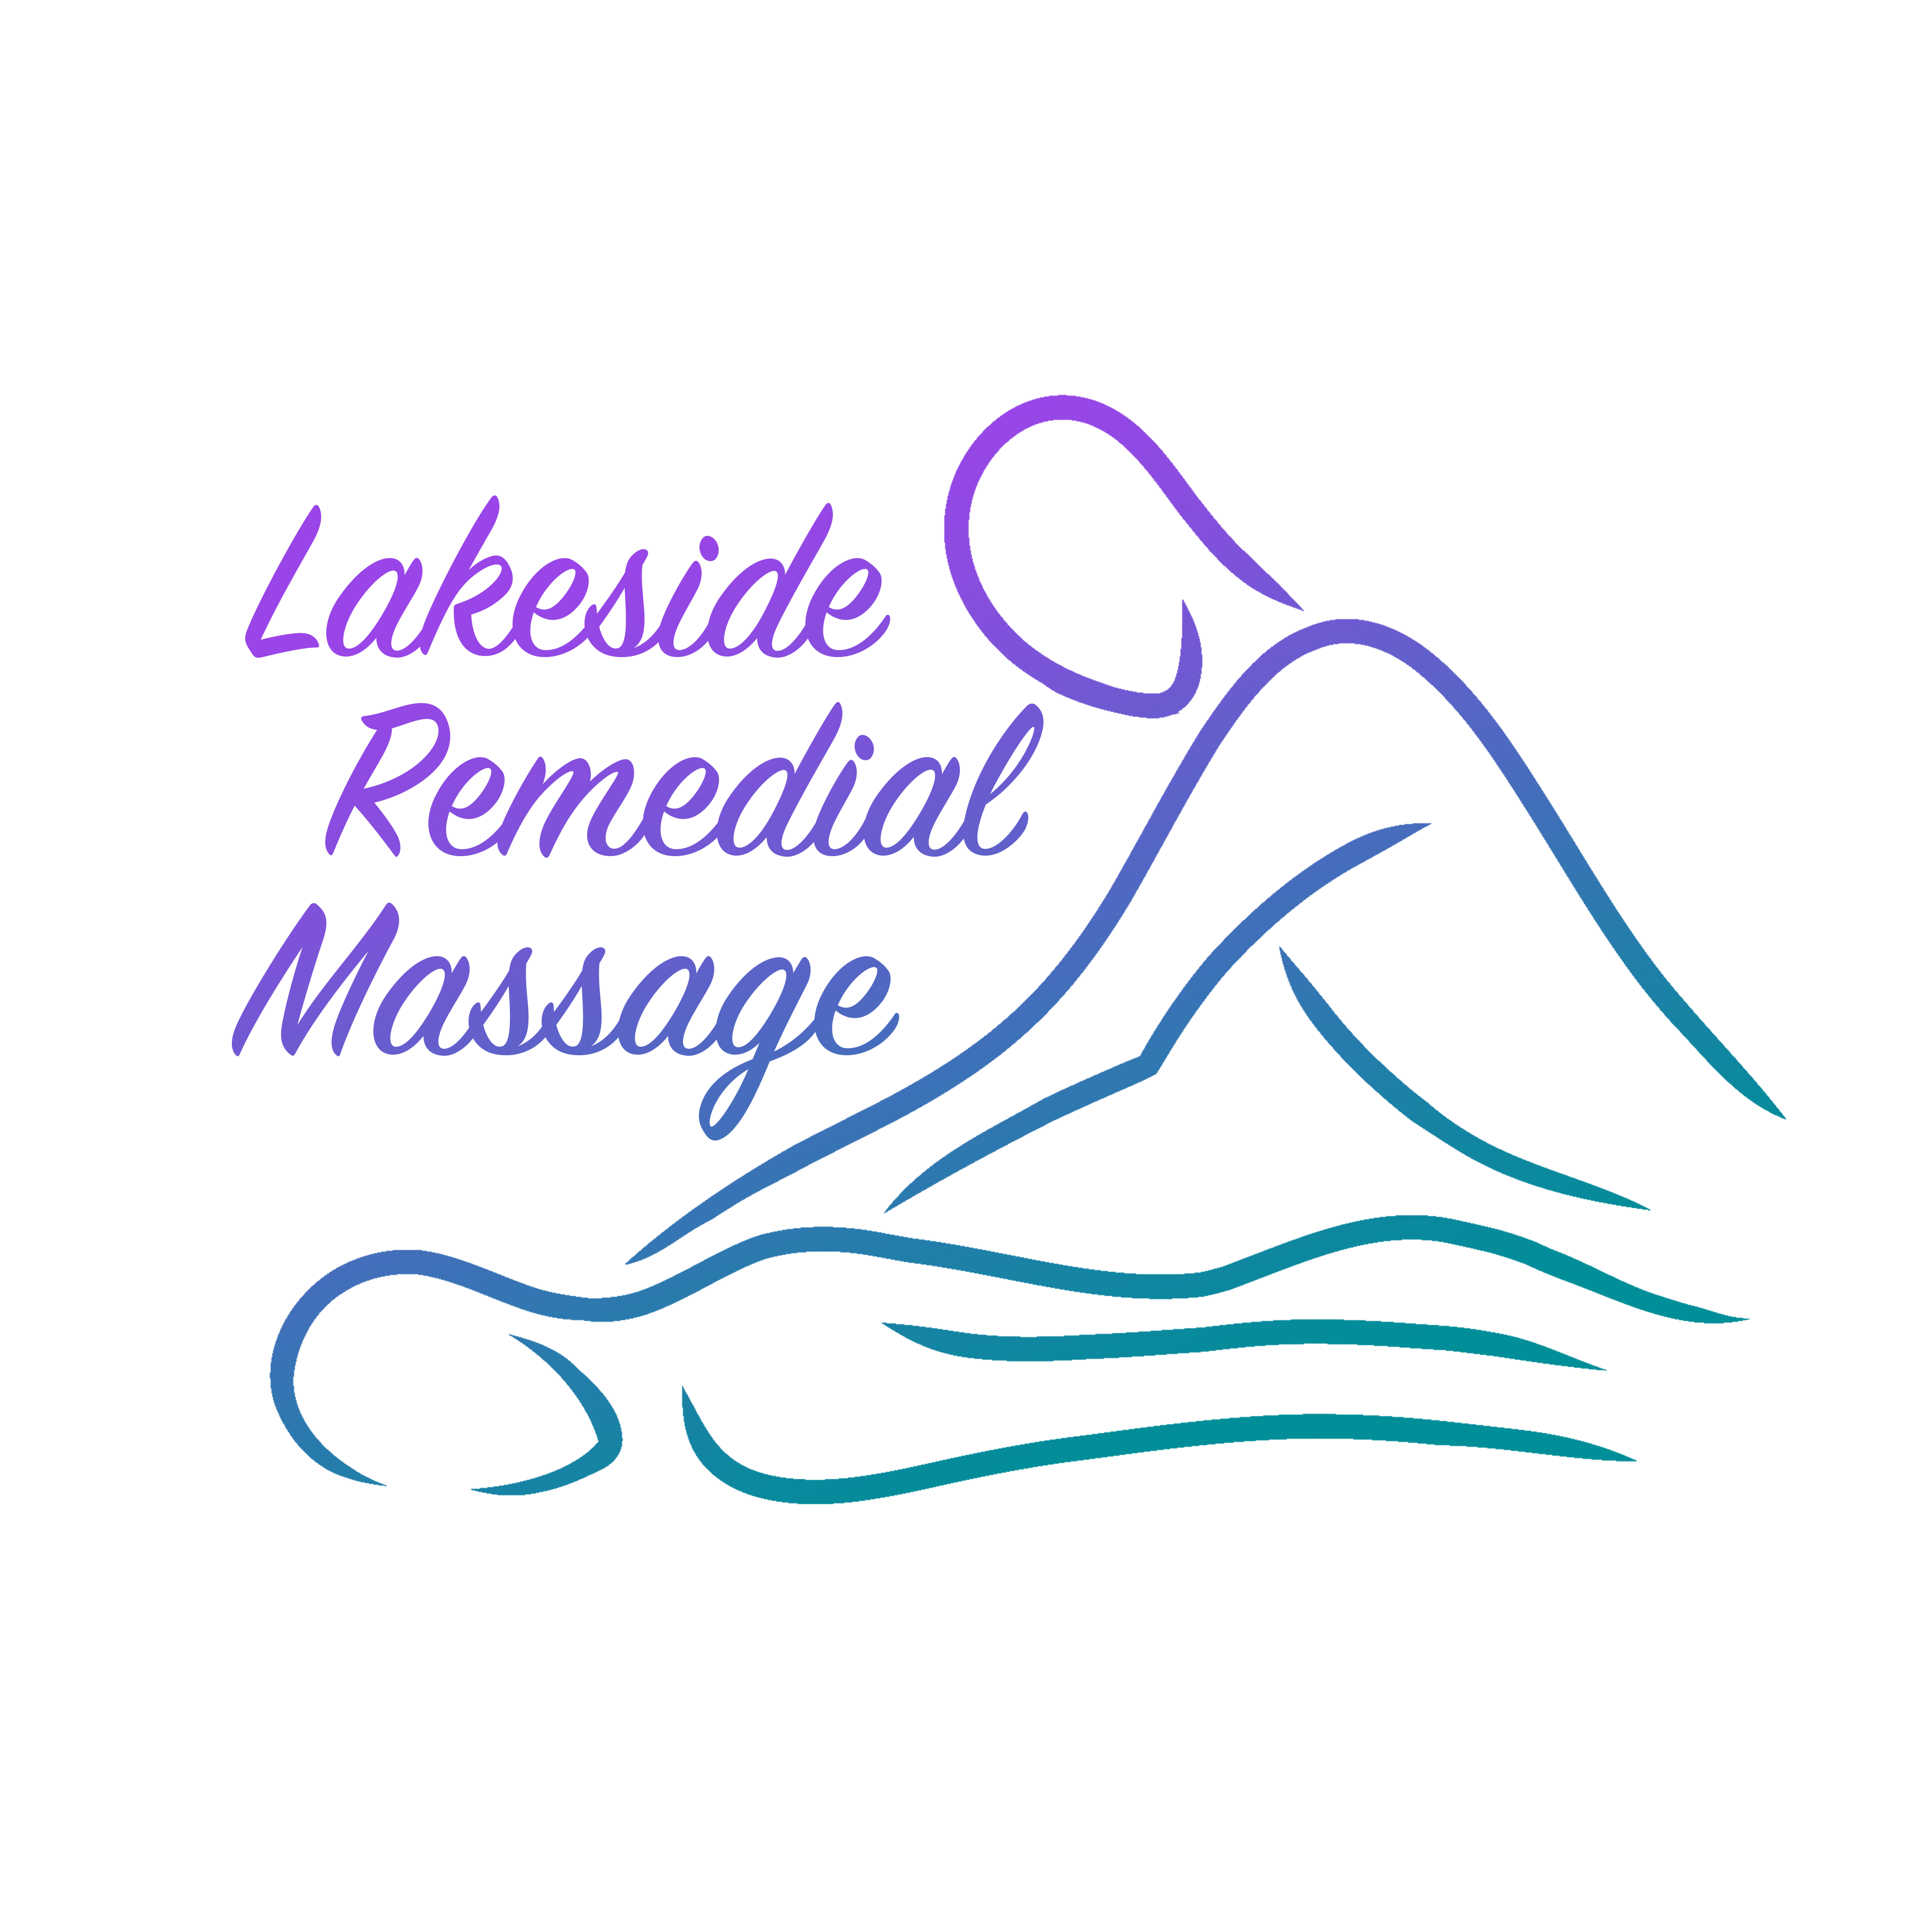 Massage clipart remedial.